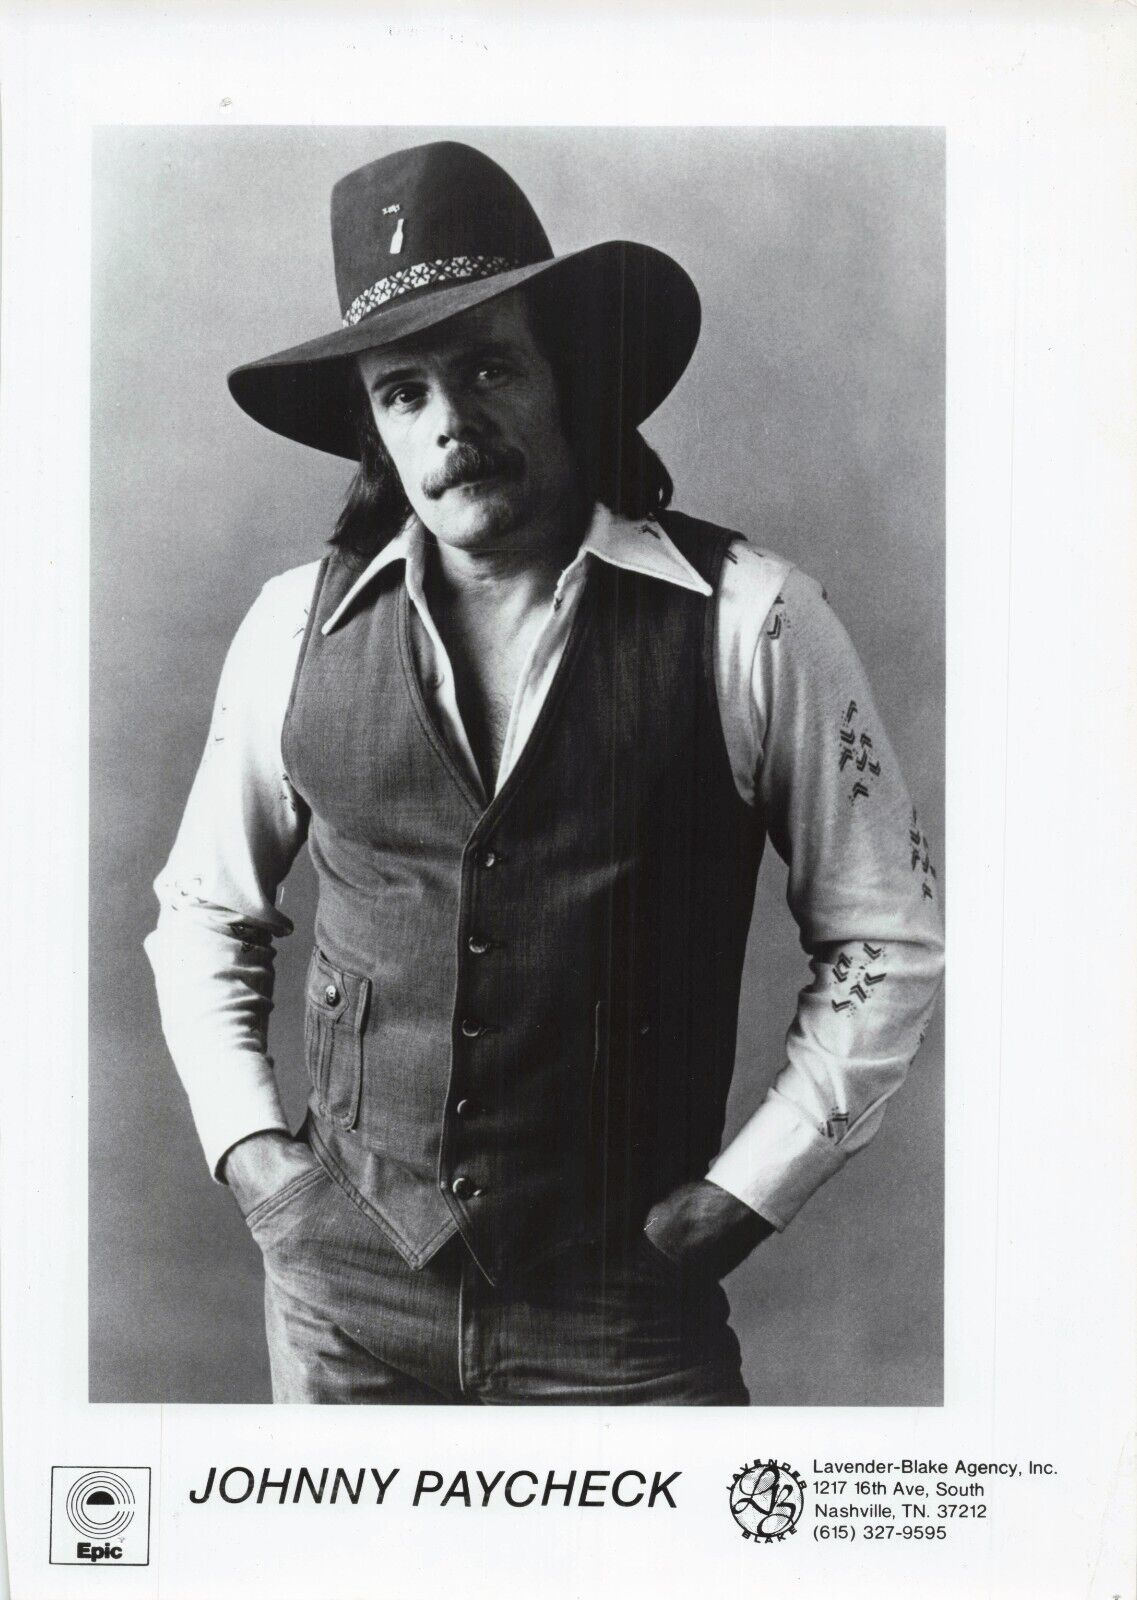 JOHNNY PAYCHECK VINTAGE 8x10 Photo COUNTRY MUSIC